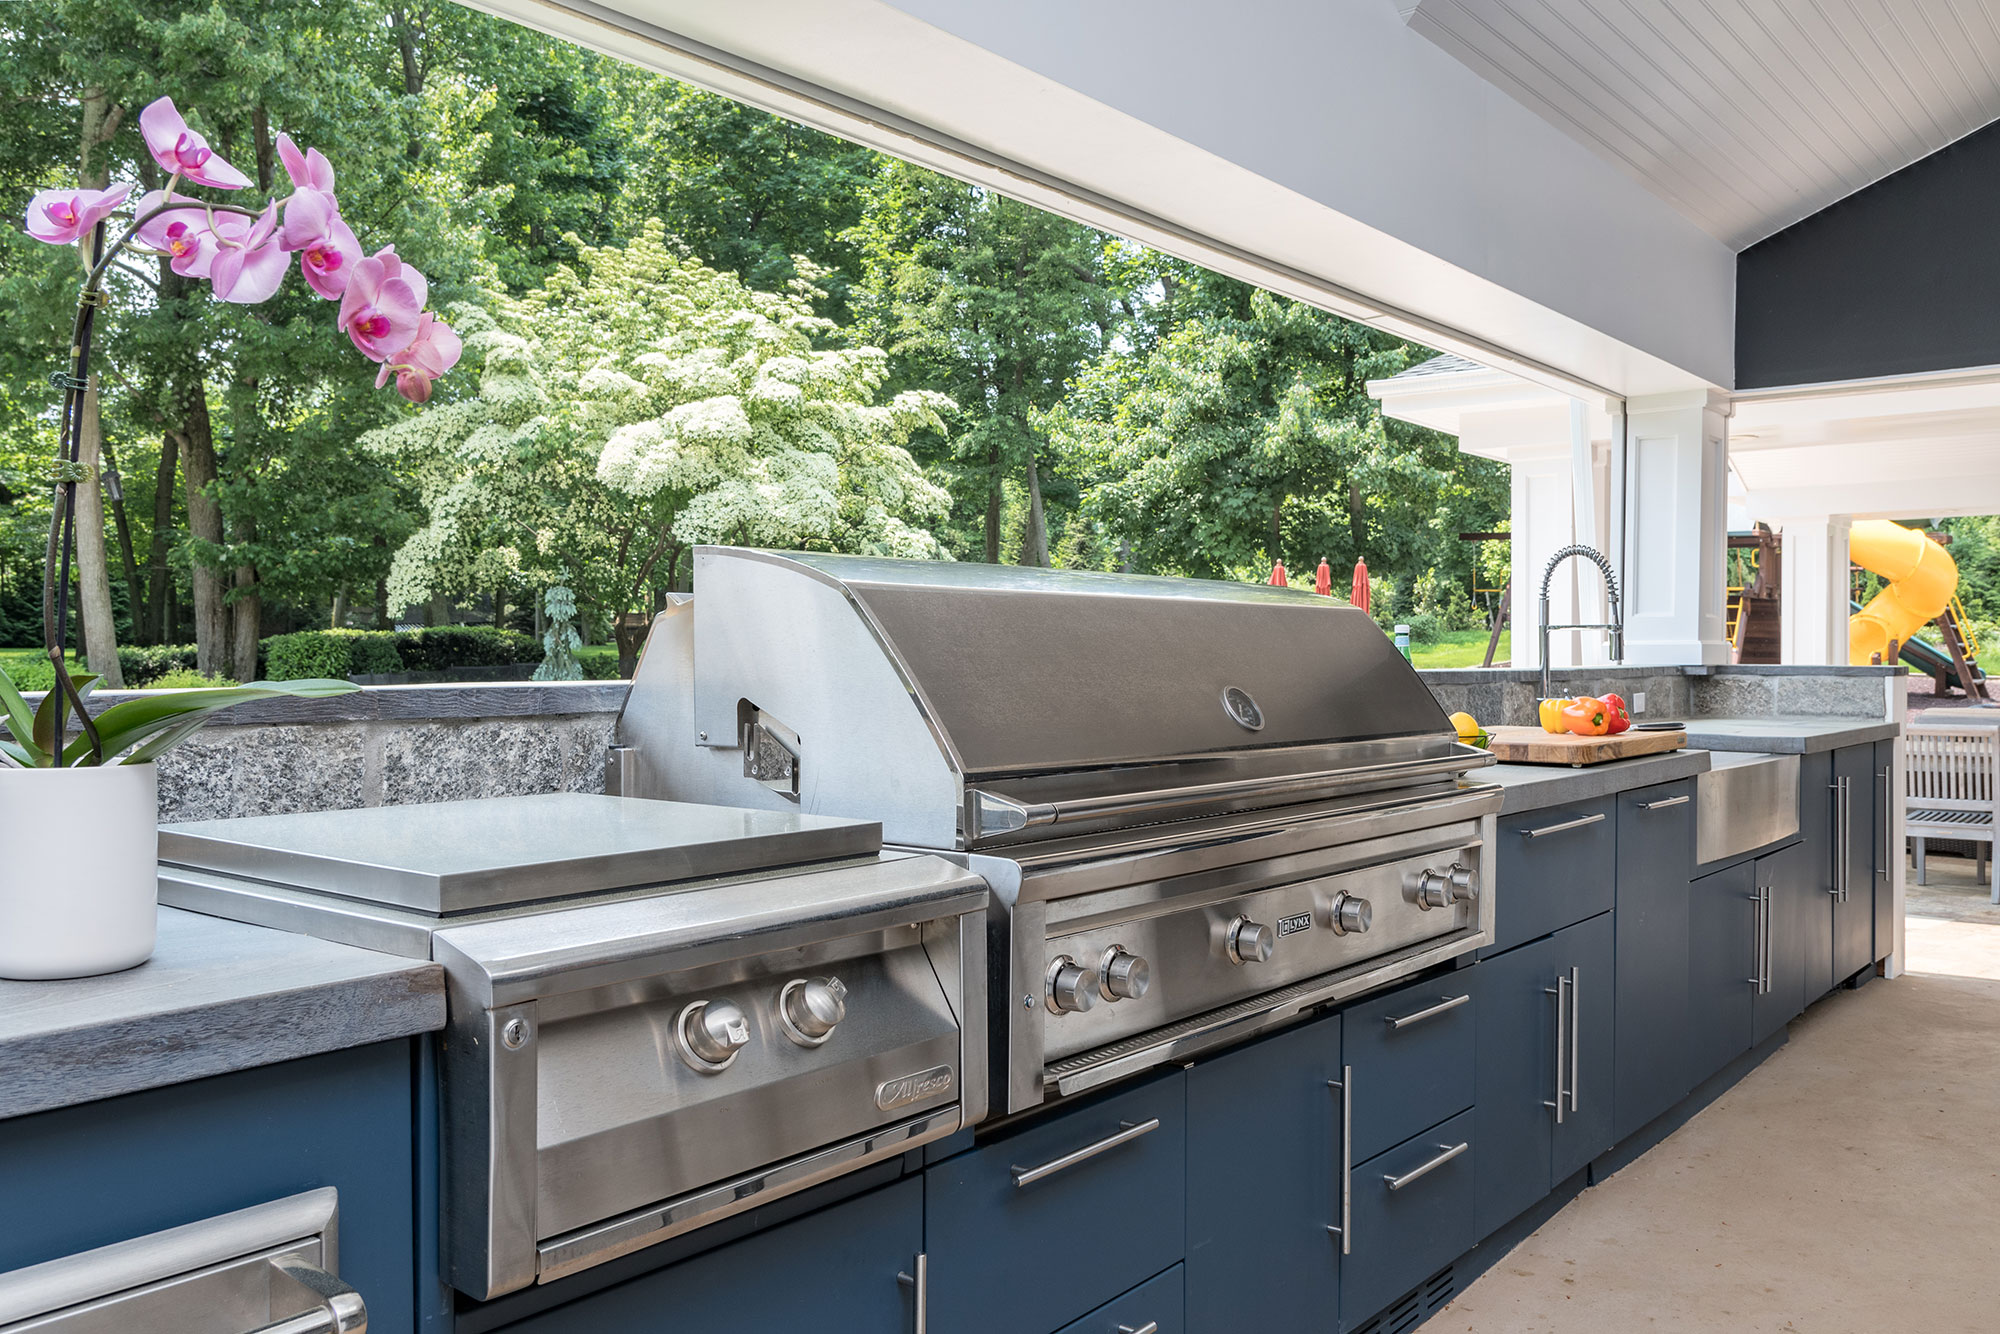 build the outdoor kitchen of your dreams